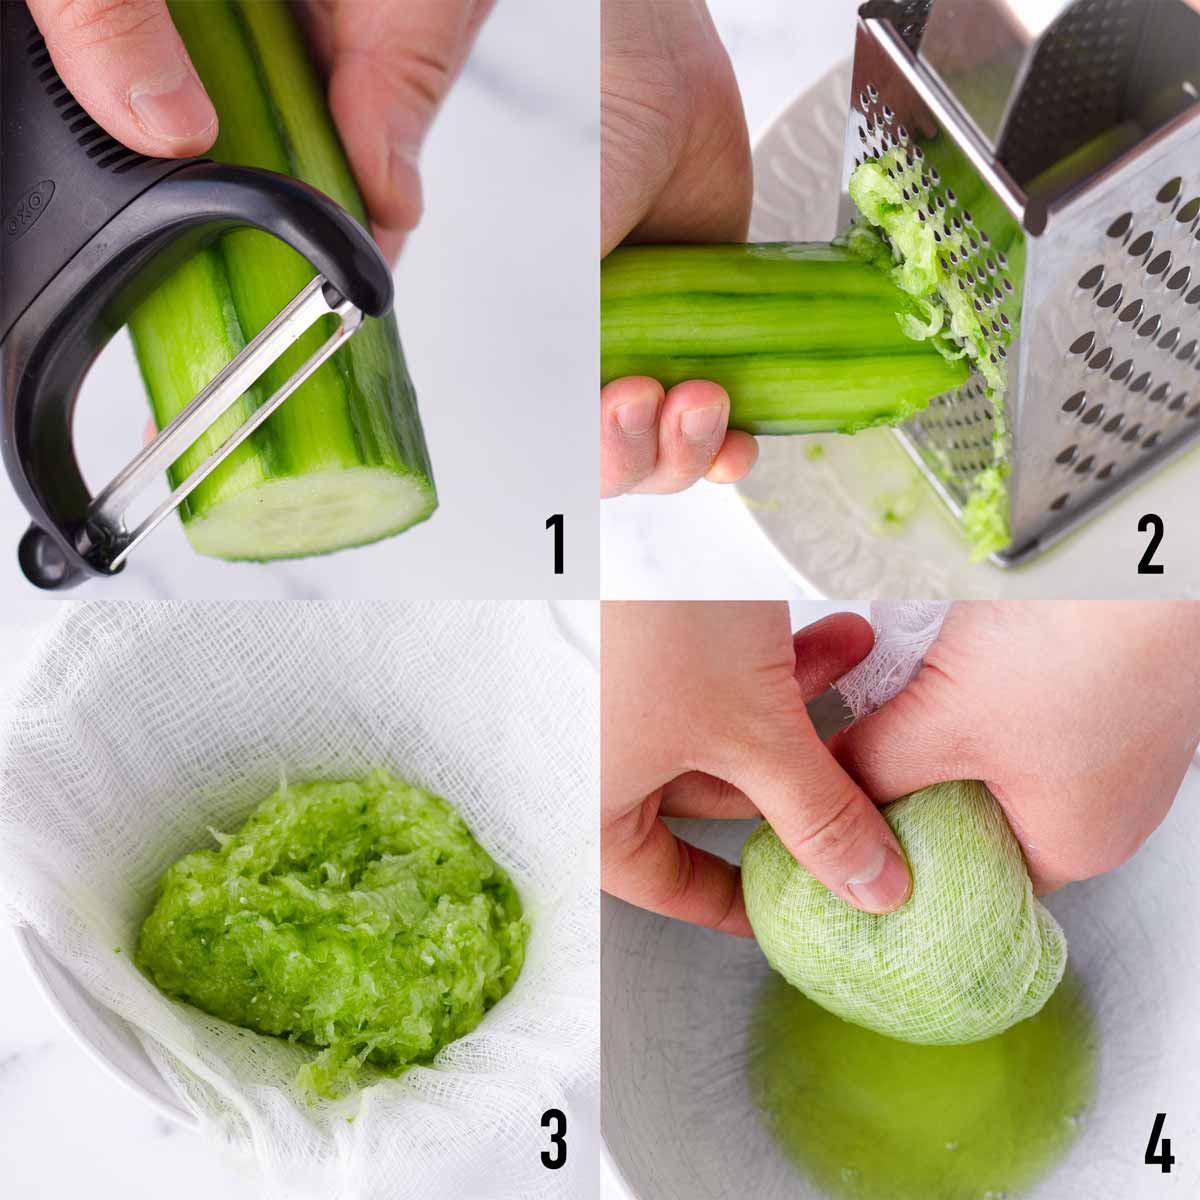 grating cucumber step by step